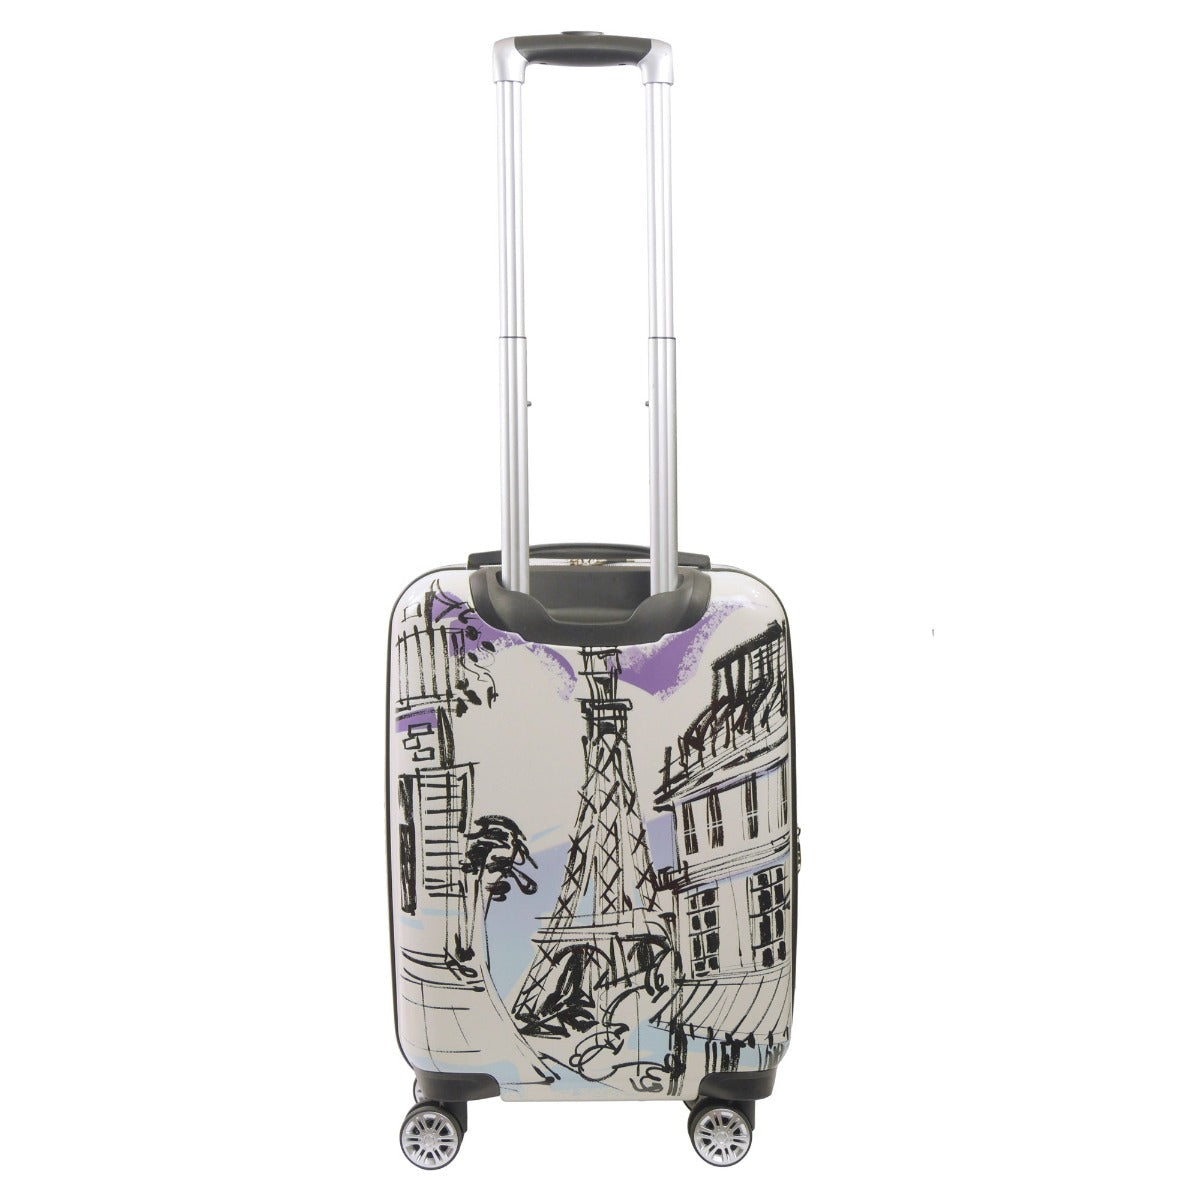 Ful Emily in Paris 21" hardside expandable luggage - cute carry on suitcase